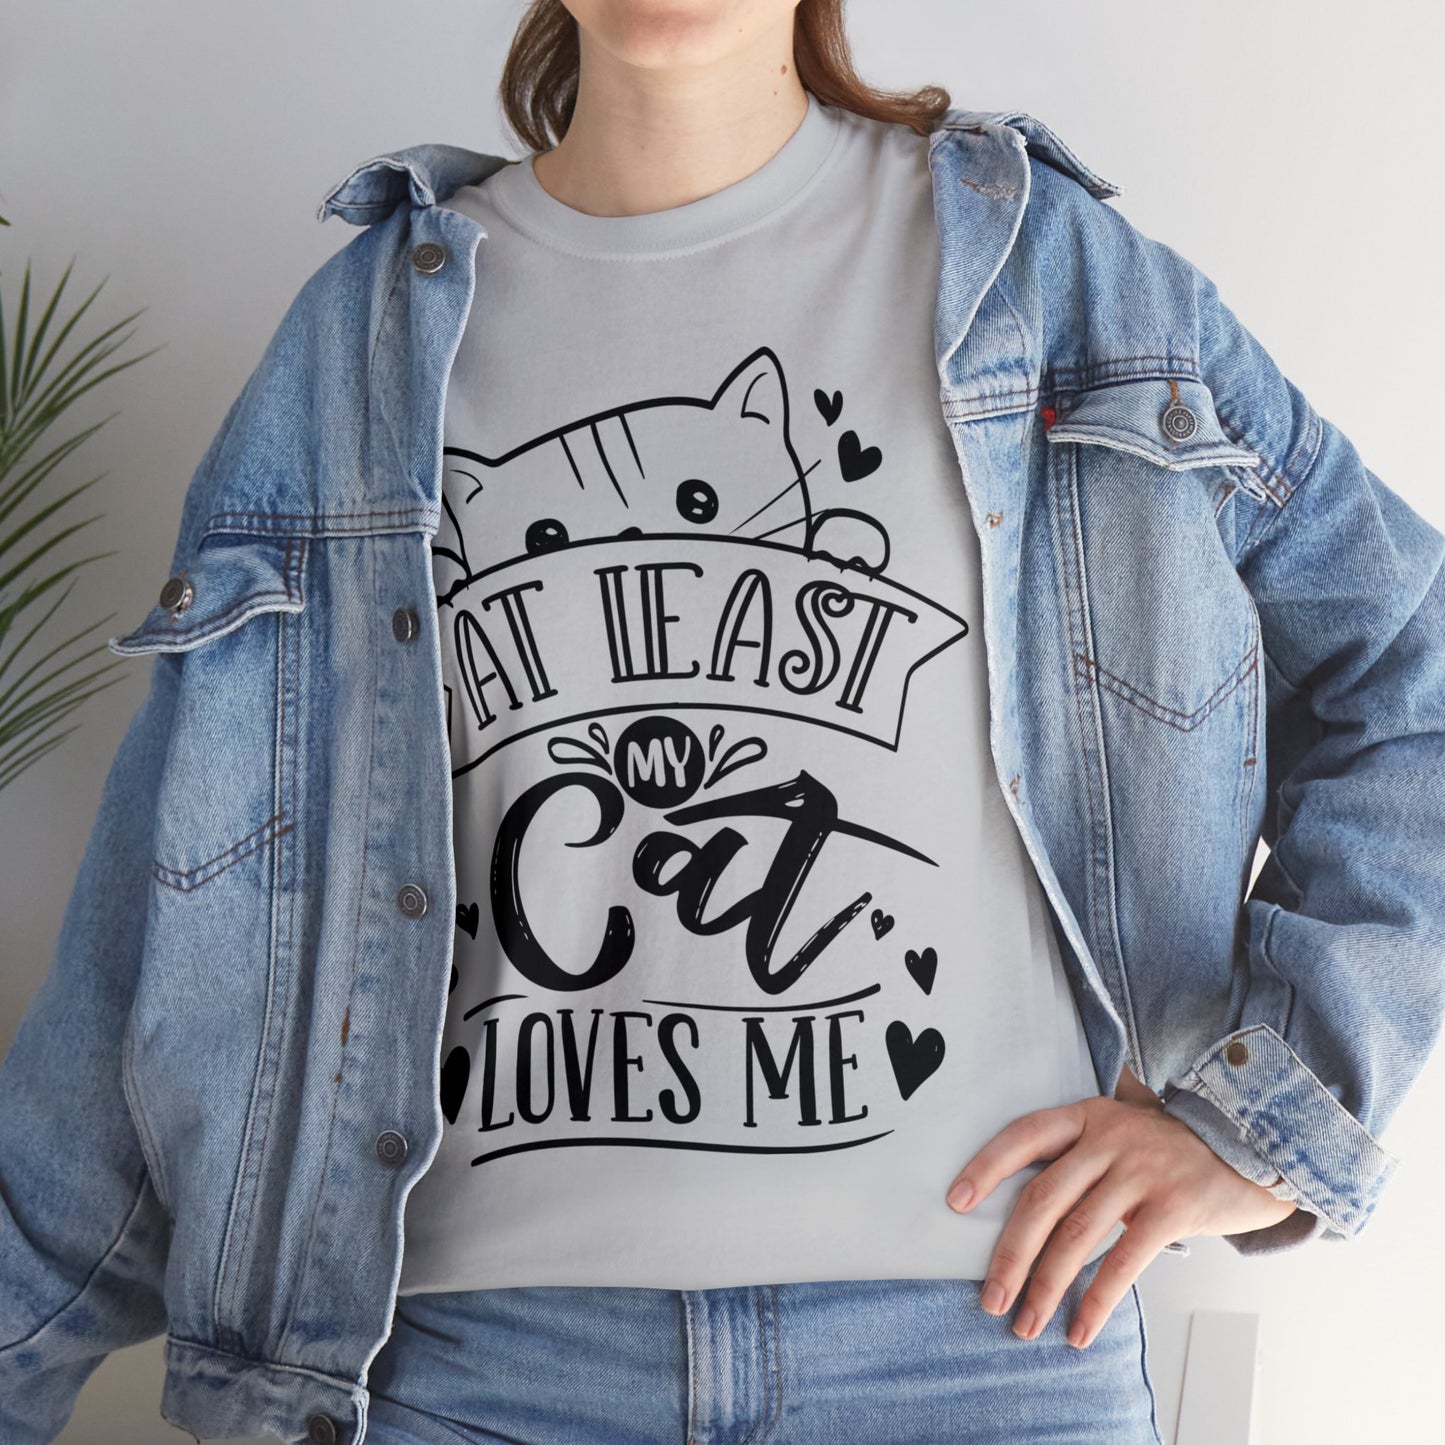 At Least My Cat Loves Me Unisex Heavy Cotton Tee